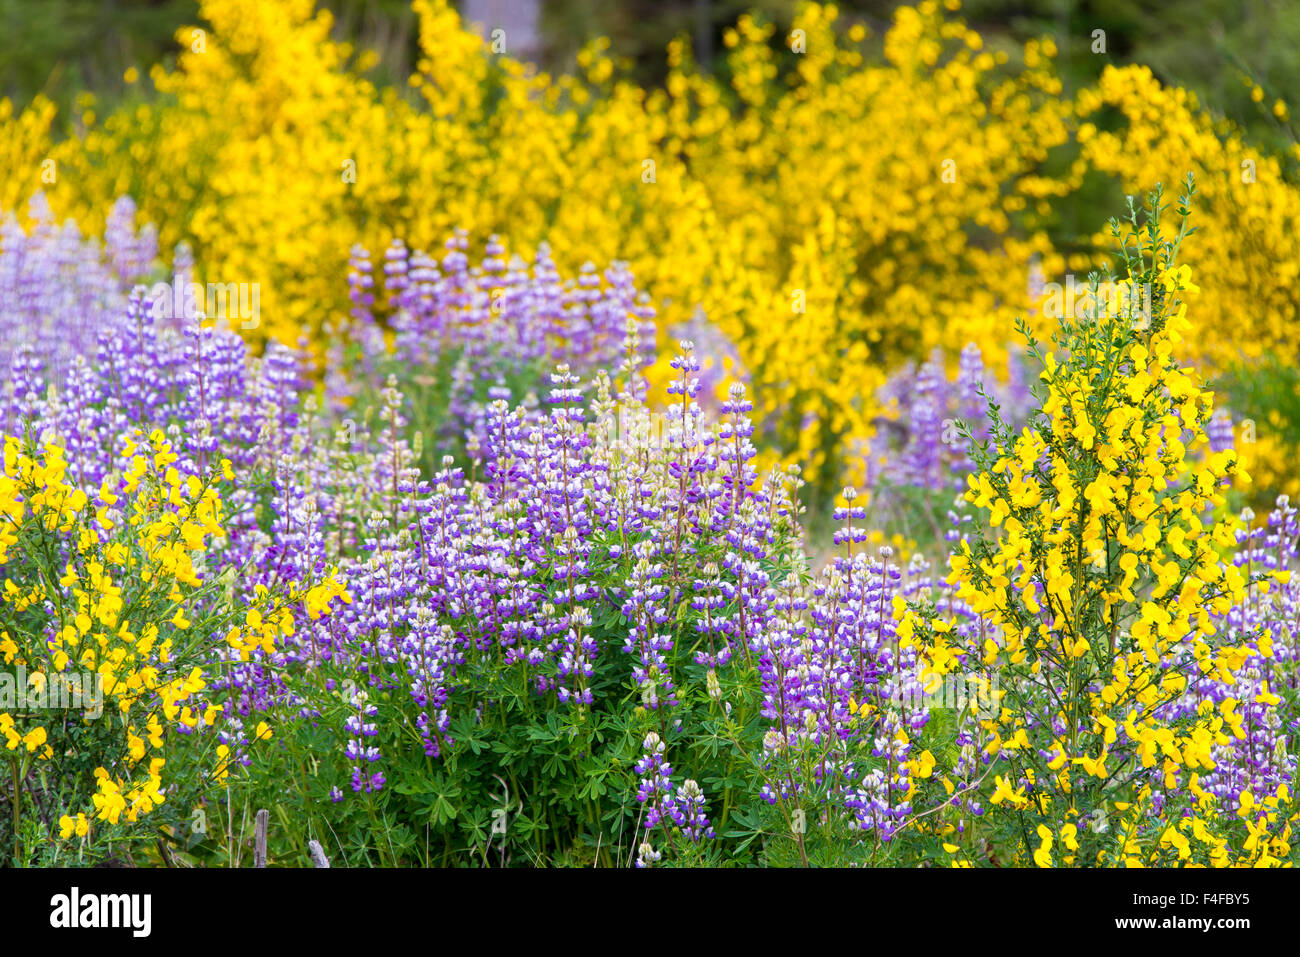 USA, Washington State, Olympic Peninsula. Clear cut field overgrown with lupine and non-native invasive Scotch Broom. Stock Photo